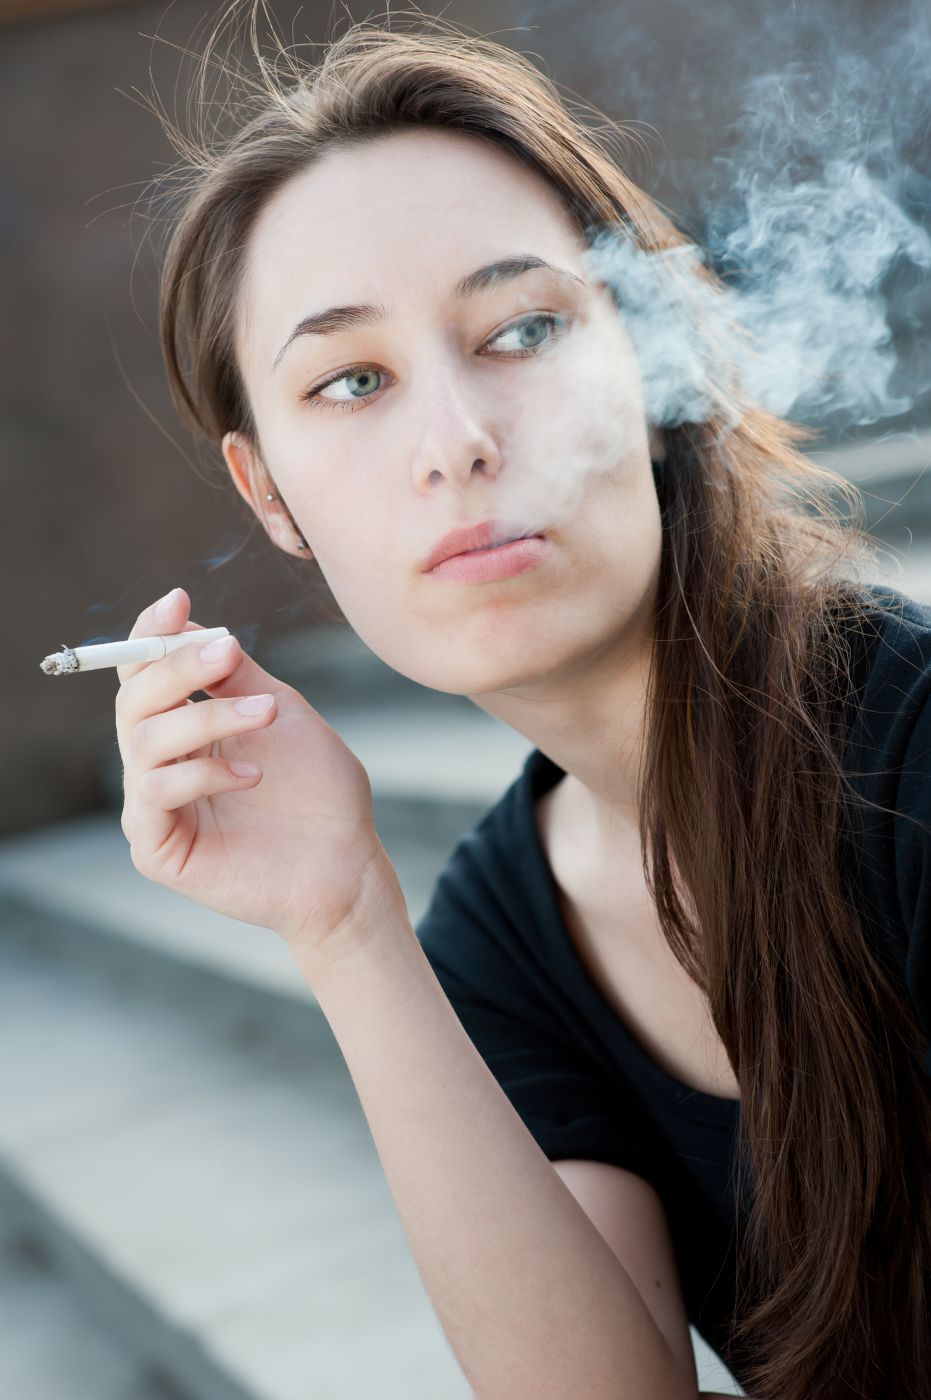 This photo shows a woman smoking a cigarette.